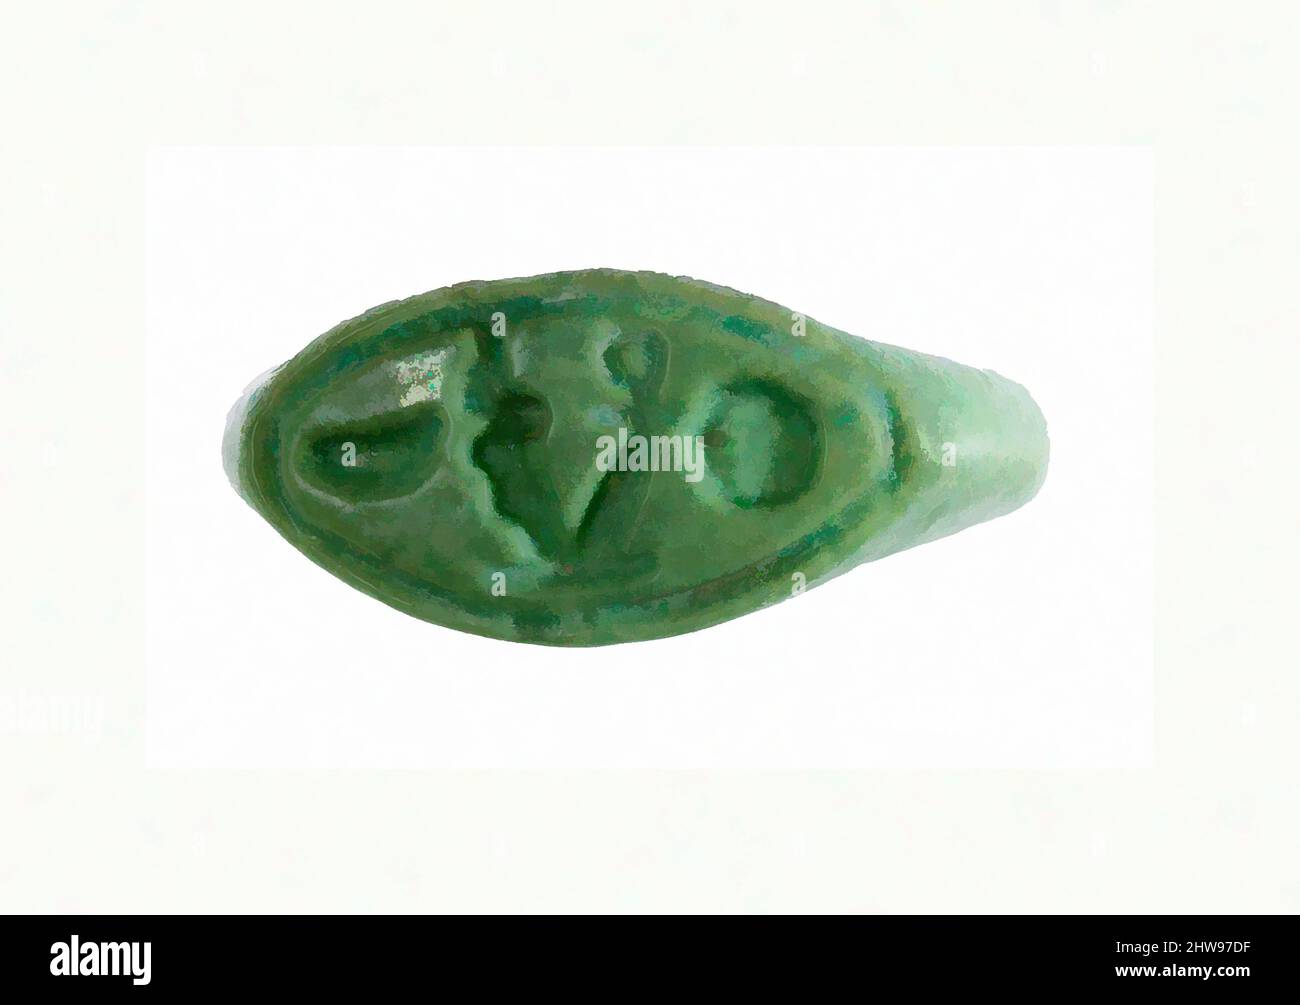 Art inspired by Ring, Prenomen of Amenhotep III, New Kingdom, Dynasty 18, ca. 1390–1352 B.C., From Egypt, Upper Egypt, Thebes, Malqata, Palace of Amenhotep III, 1910–11, Faience, Diam. 2.2 cm (7/8 in), Inscribed on this ring is the throne name of pharaoh Amenhotep III 'Nebmaatre' that, Classic works modernized by Artotop with a splash of modernity. Shapes, color and value, eye-catching visual impact on art. Emotions through freedom of artworks in a contemporary way. A timeless message pursuing a wildly creative new direction. Artists turning to the digital medium and creating the Artotop NFT Stock Photo